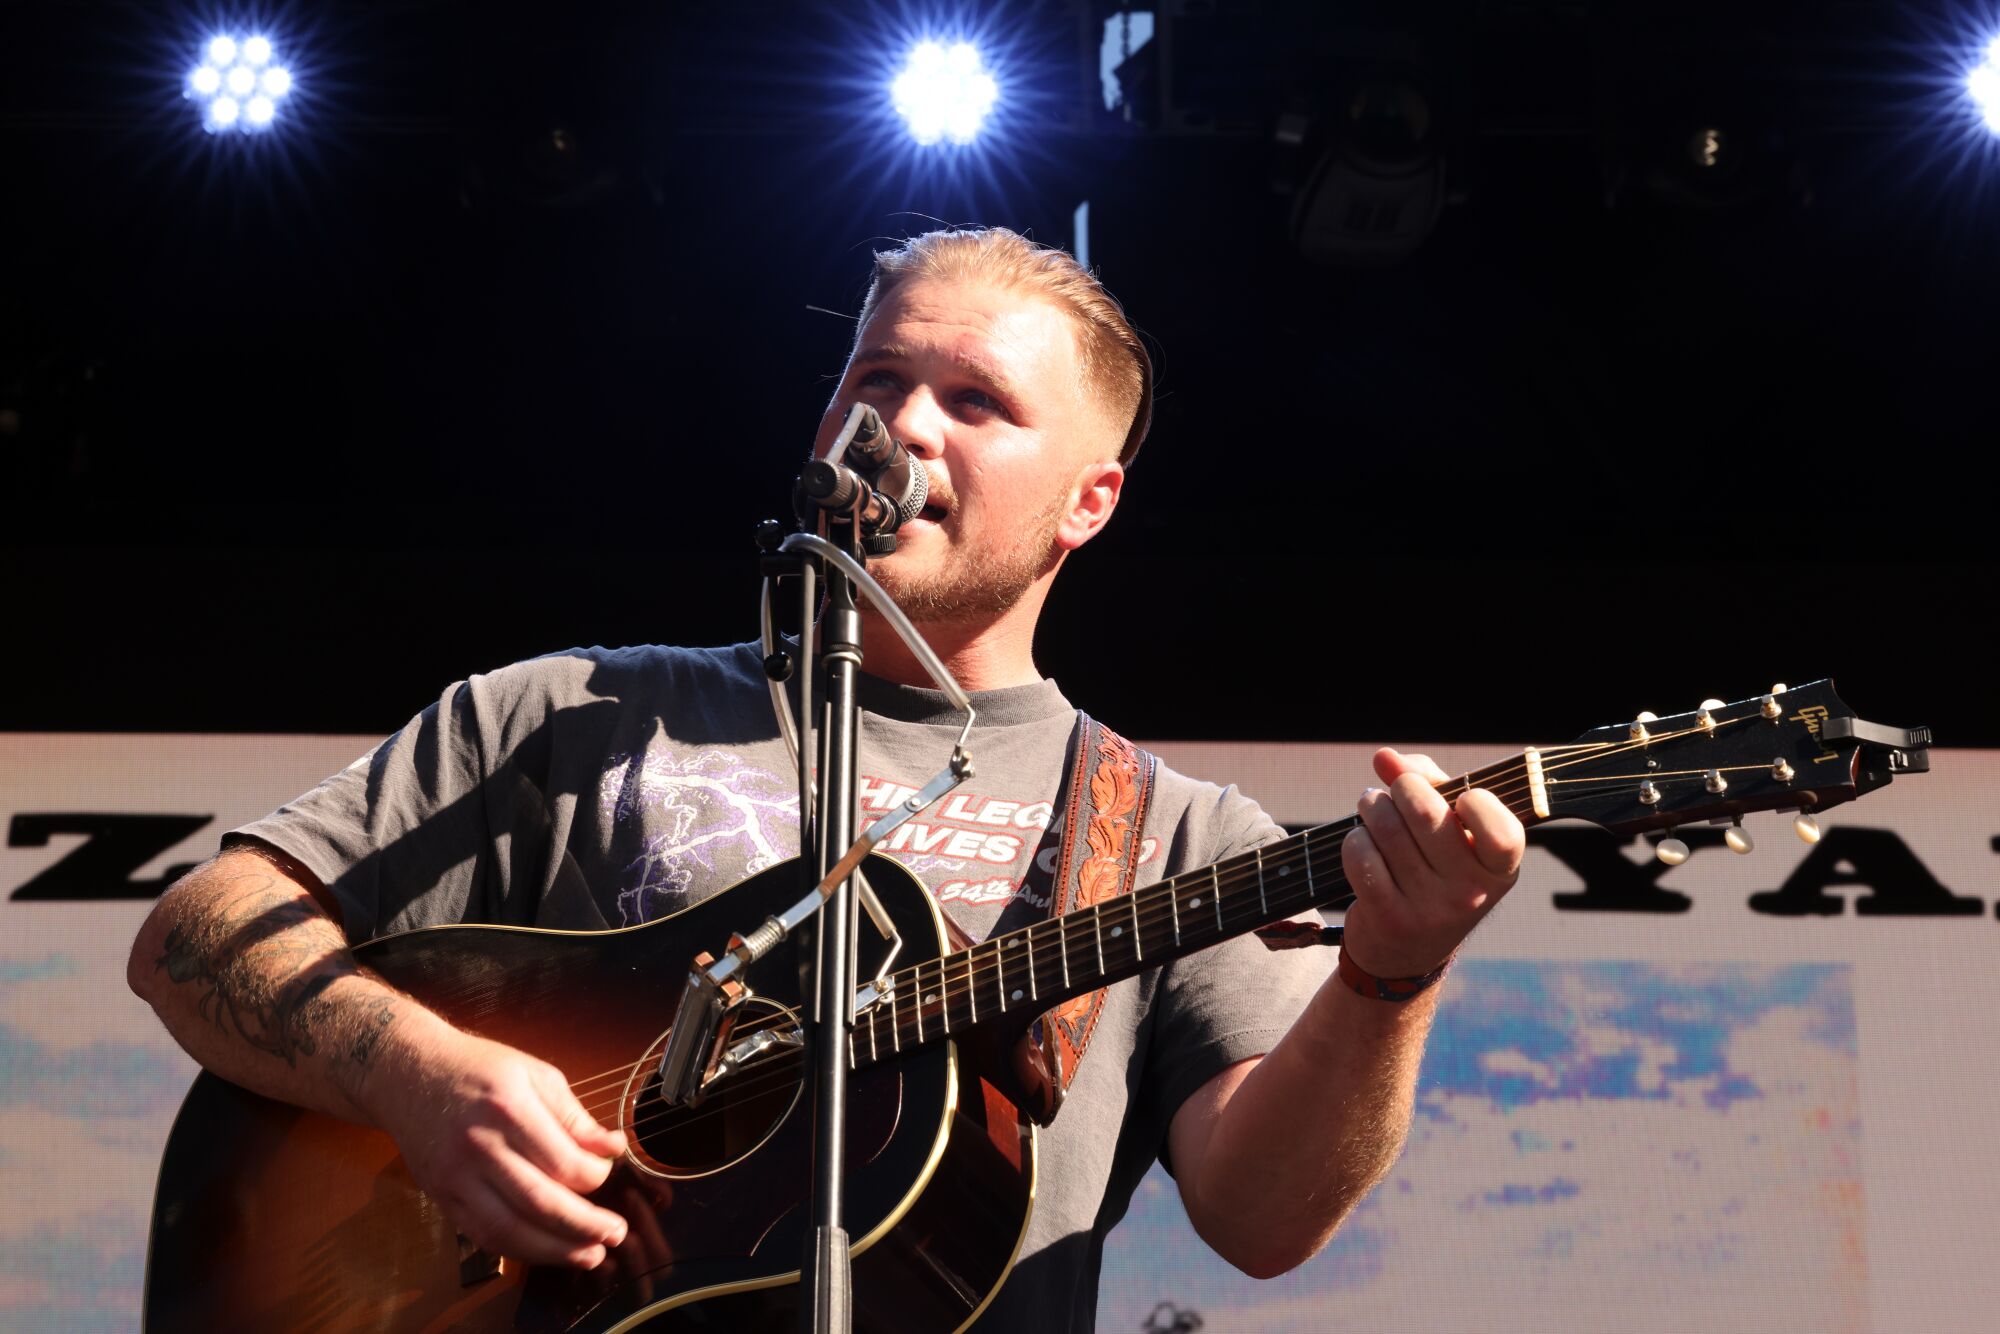 A country singer performs onstage with an acoustic guitar